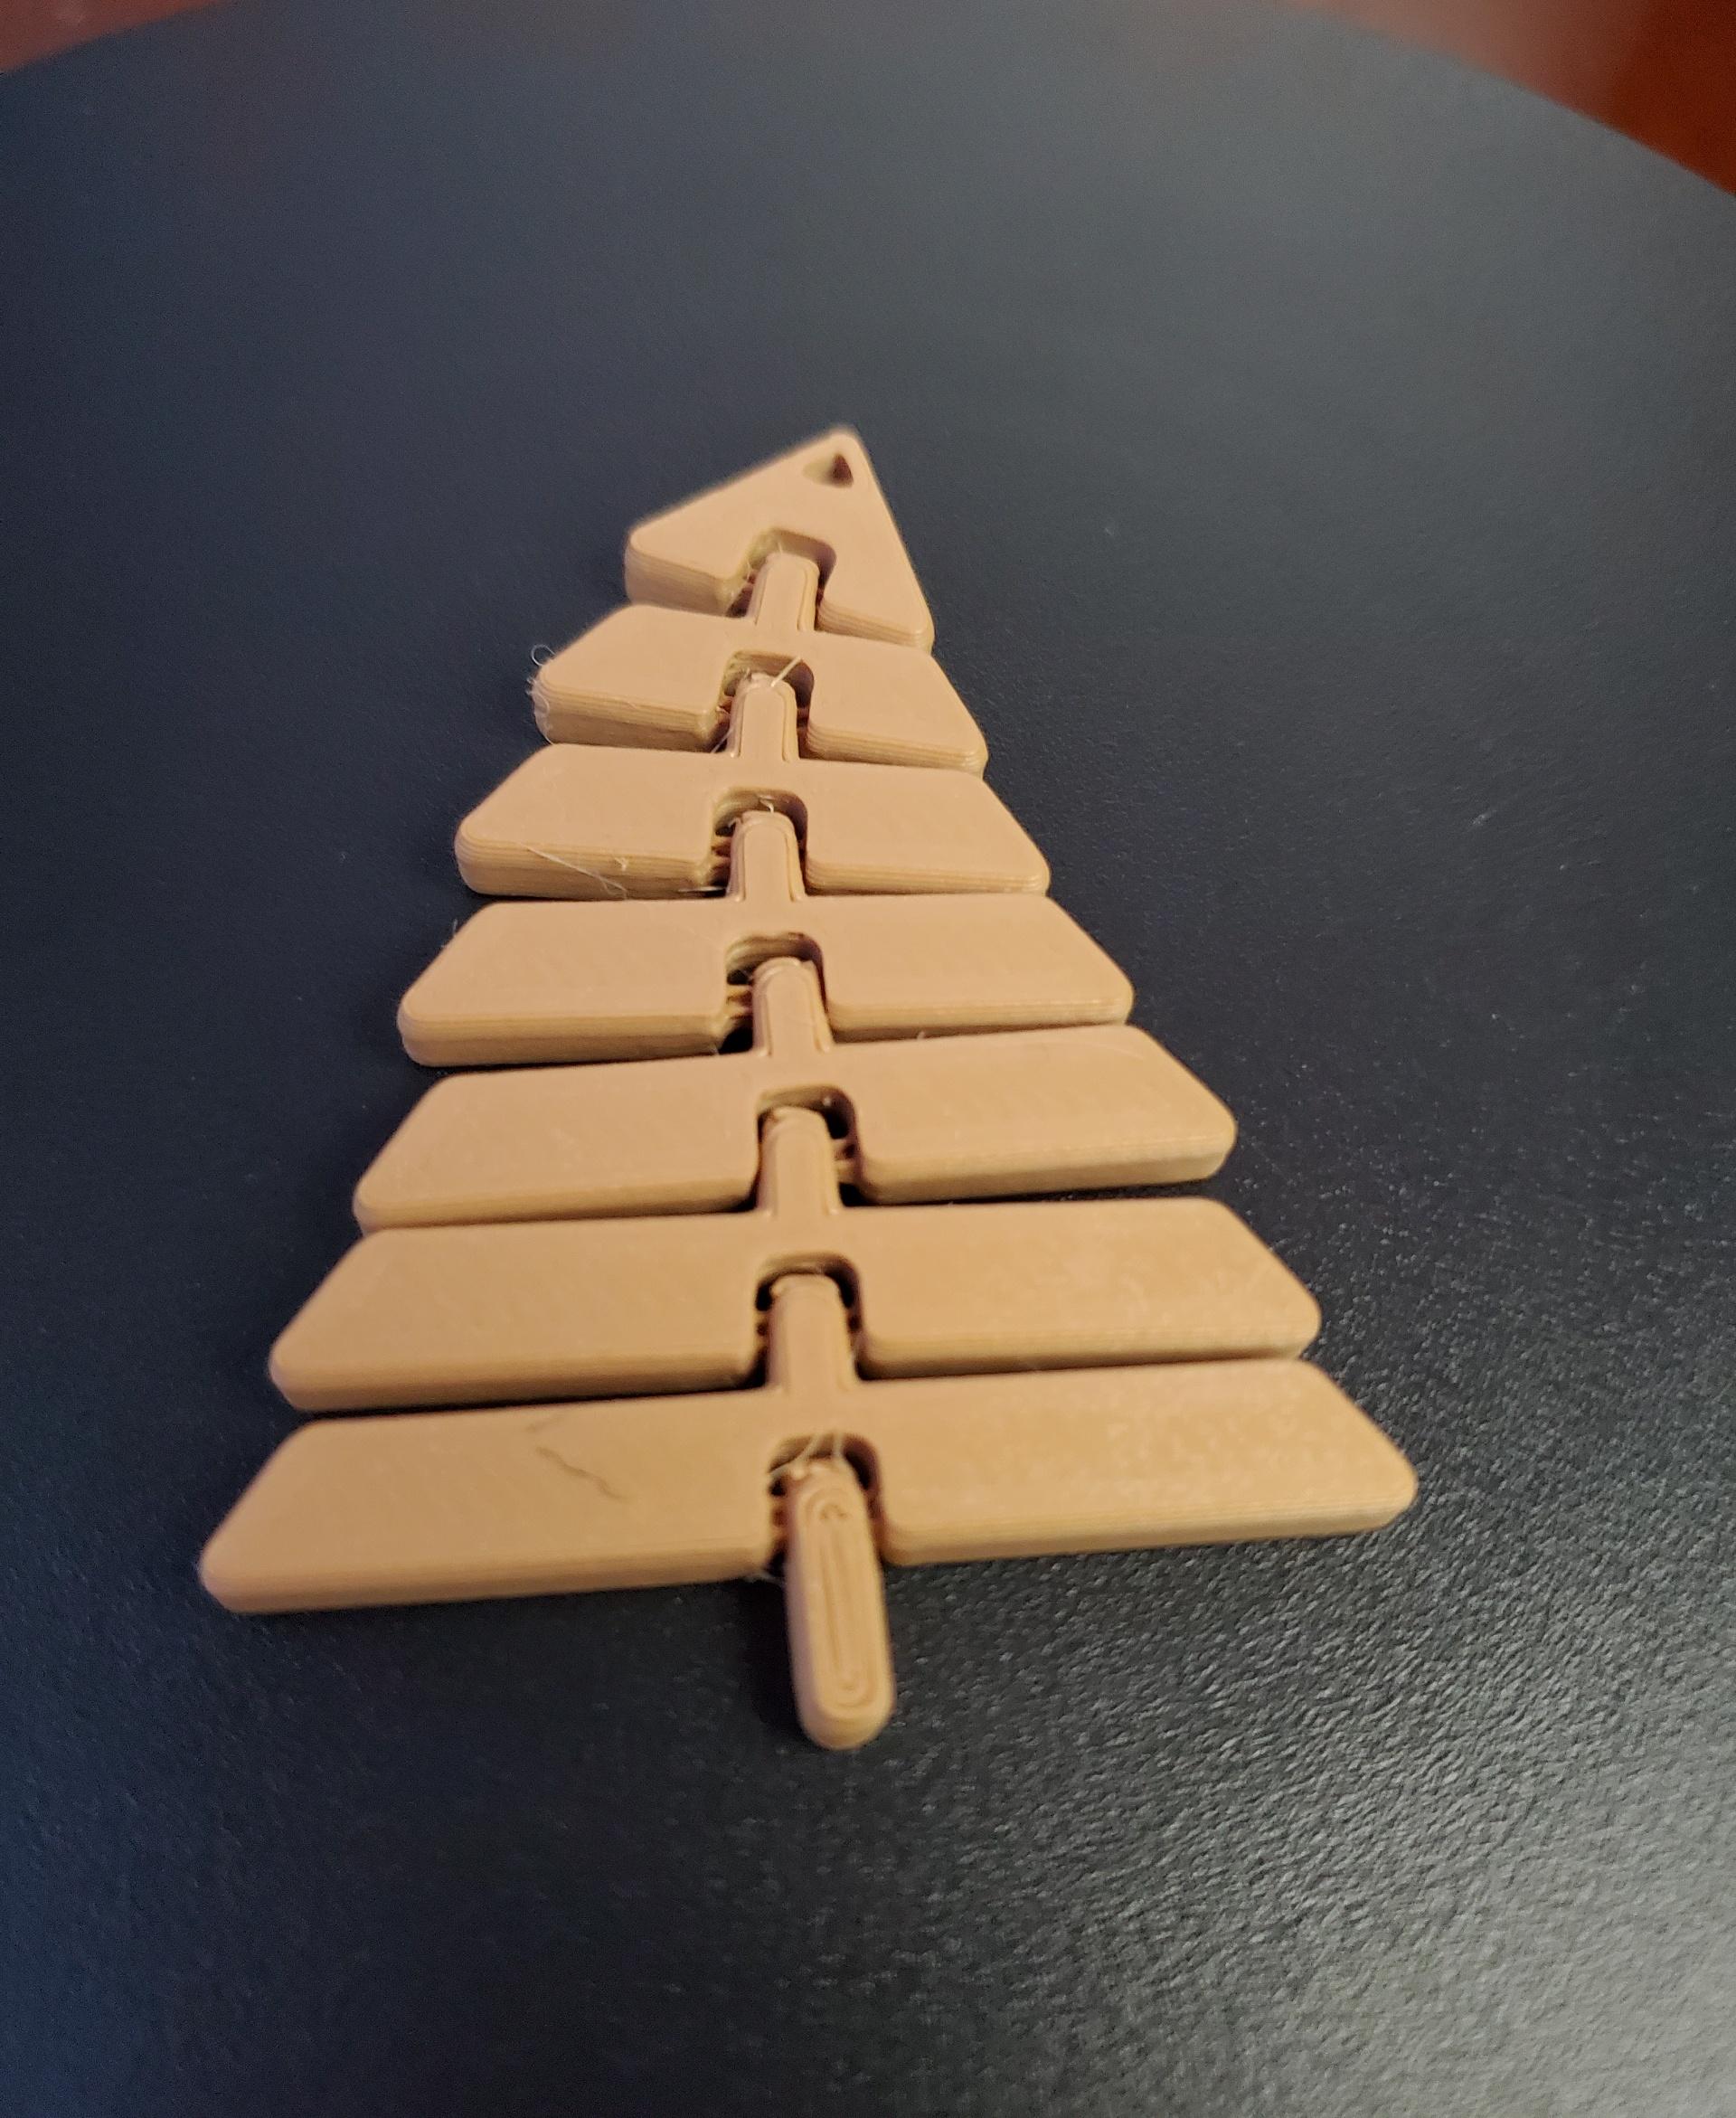 Articulated Christmas Tree Keychain - Print in place fidget toy - polyterra wood - 3d model